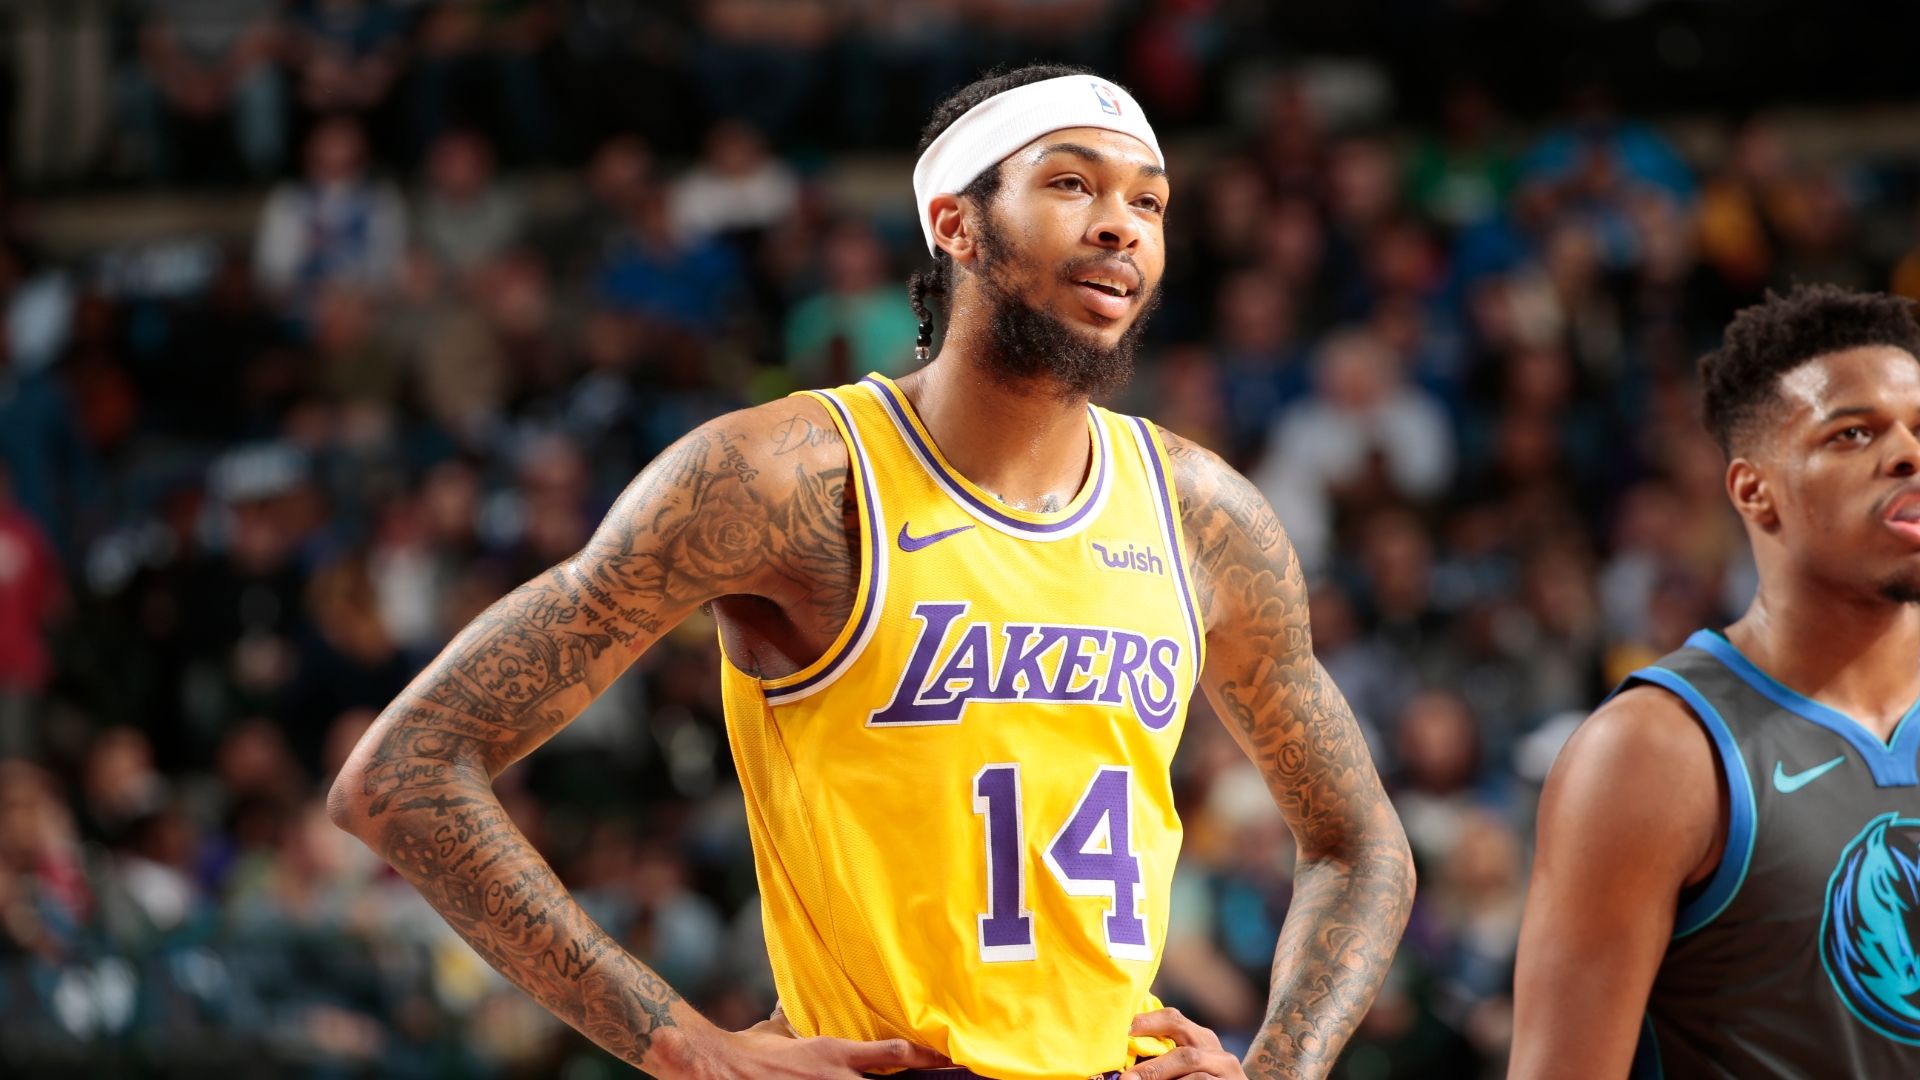 Ingram and Ball lead Lakers to 107-97 win over Mavericks - Net sports 2471920 x 1080